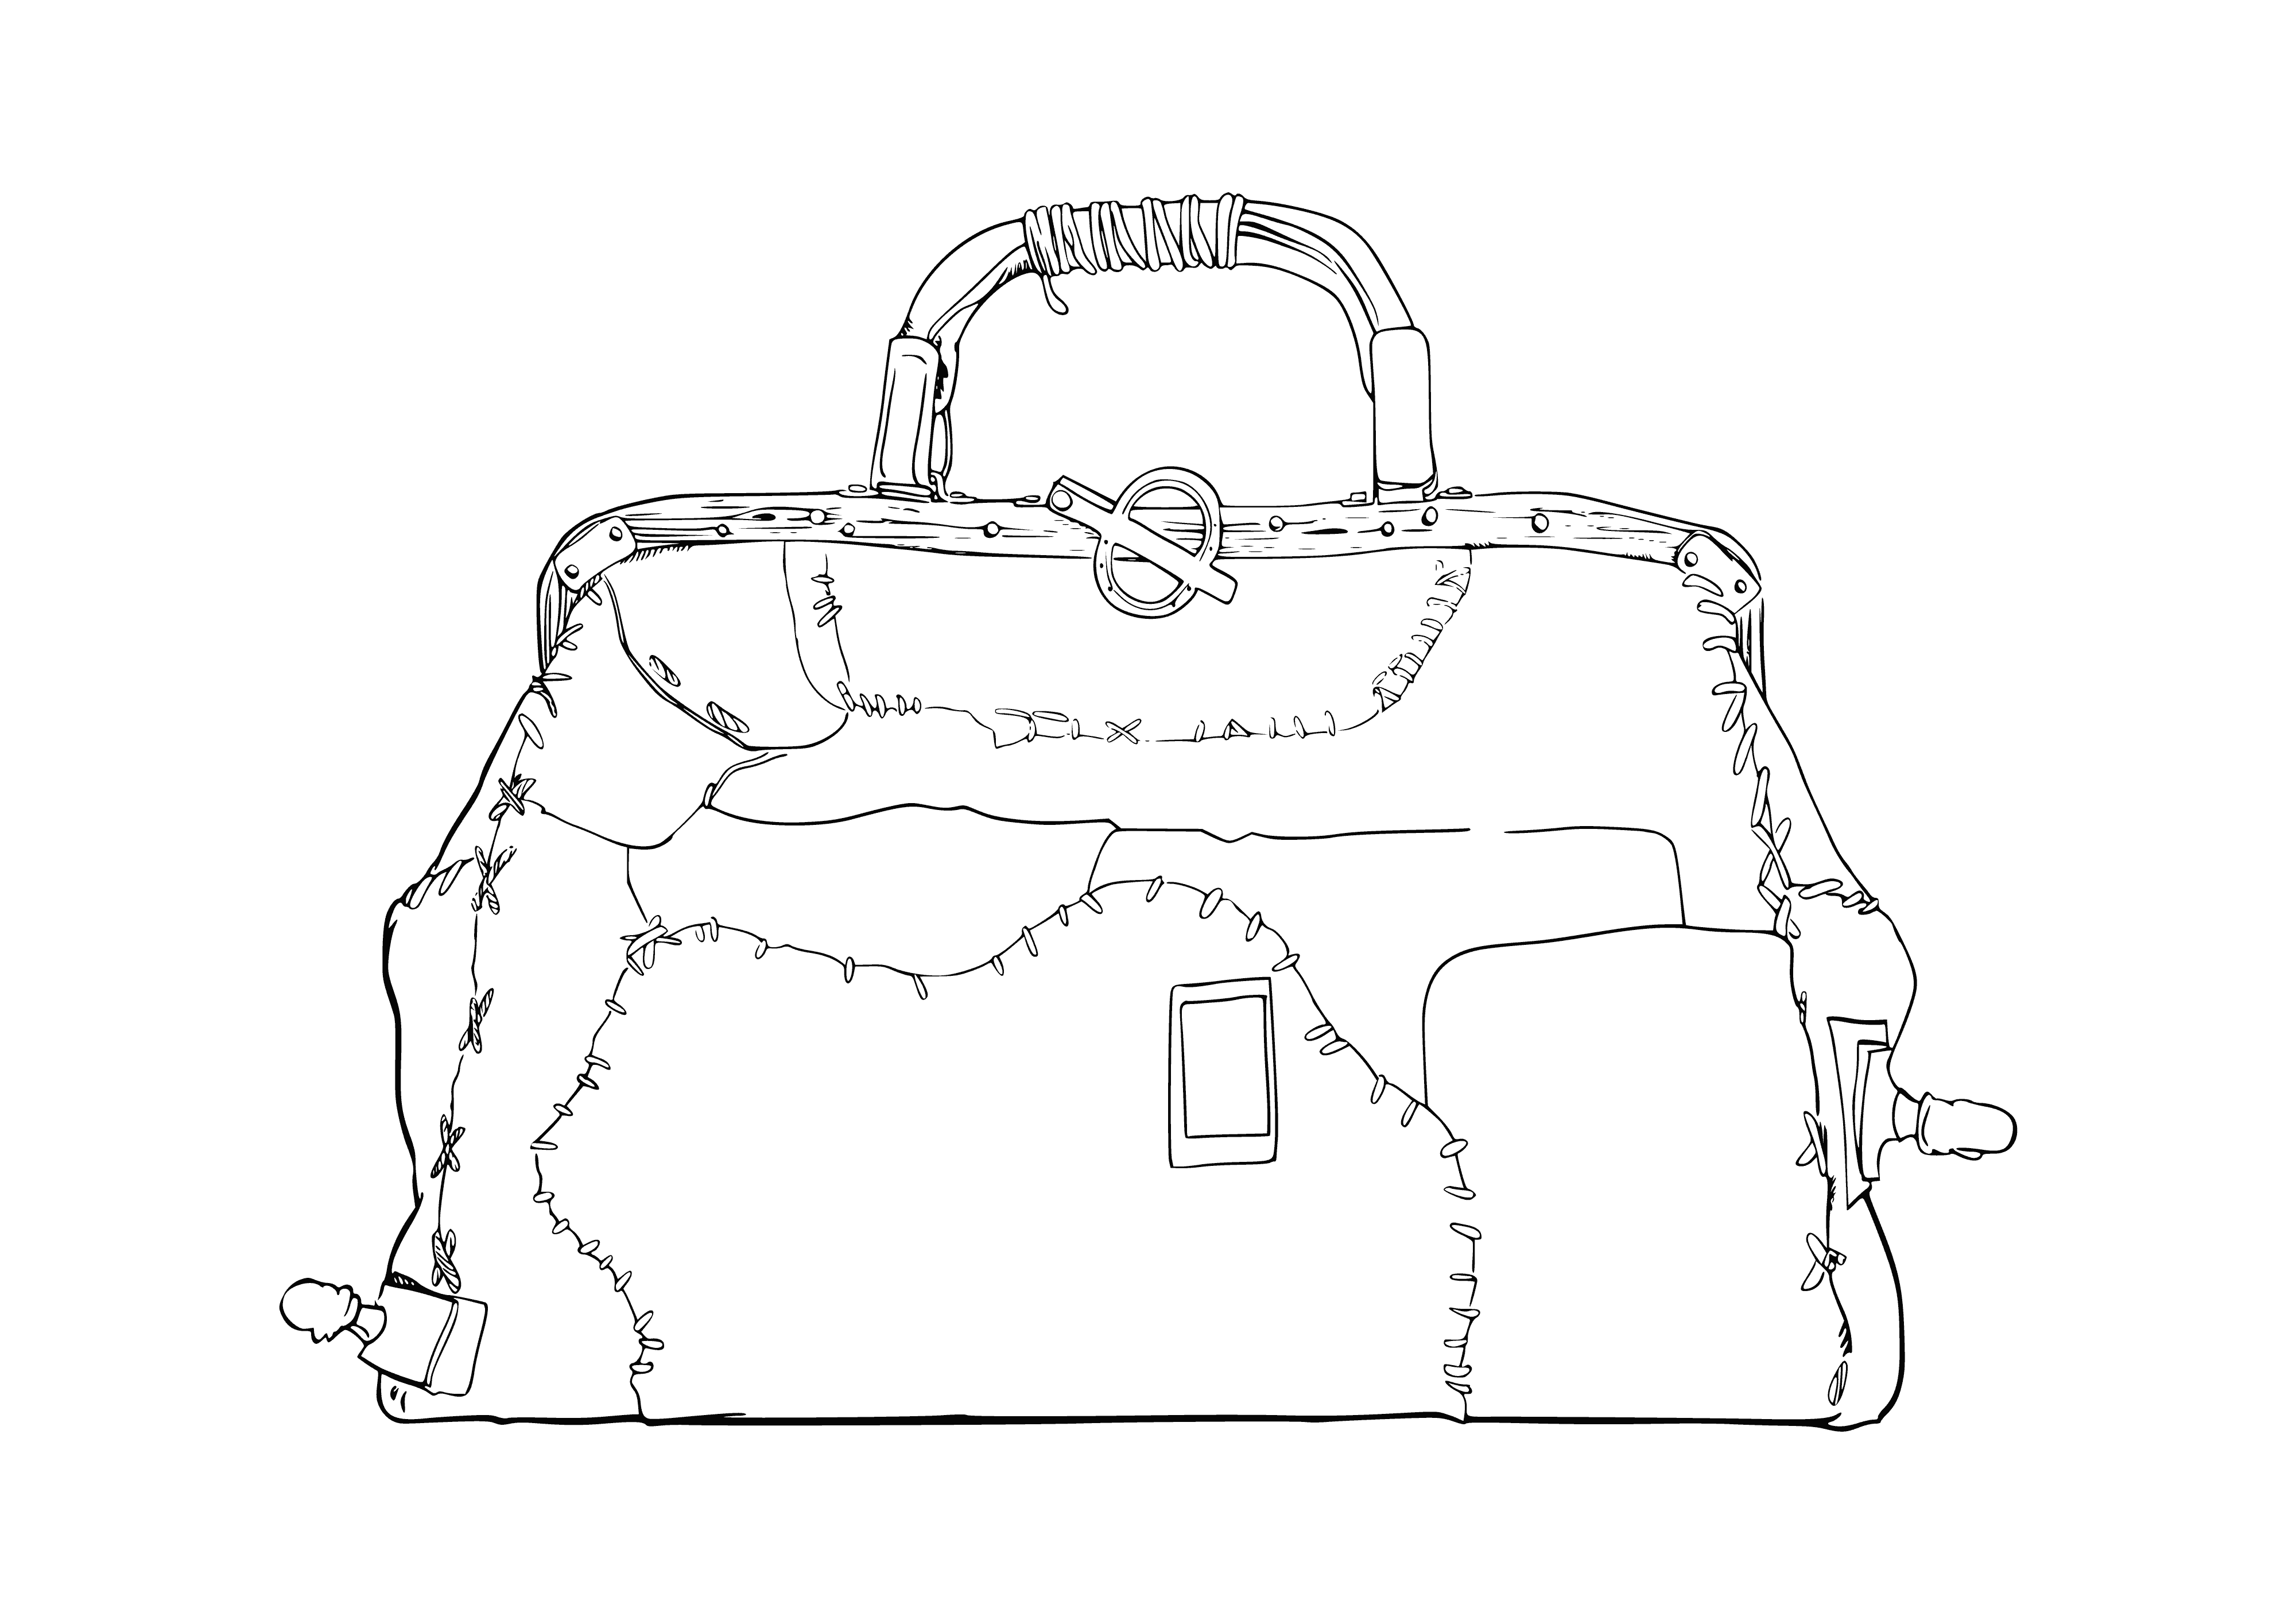 coloring page: Giant has huge leather bag filled with all sorts of things: bones, rocks, and sticks. Straps over shoulder.